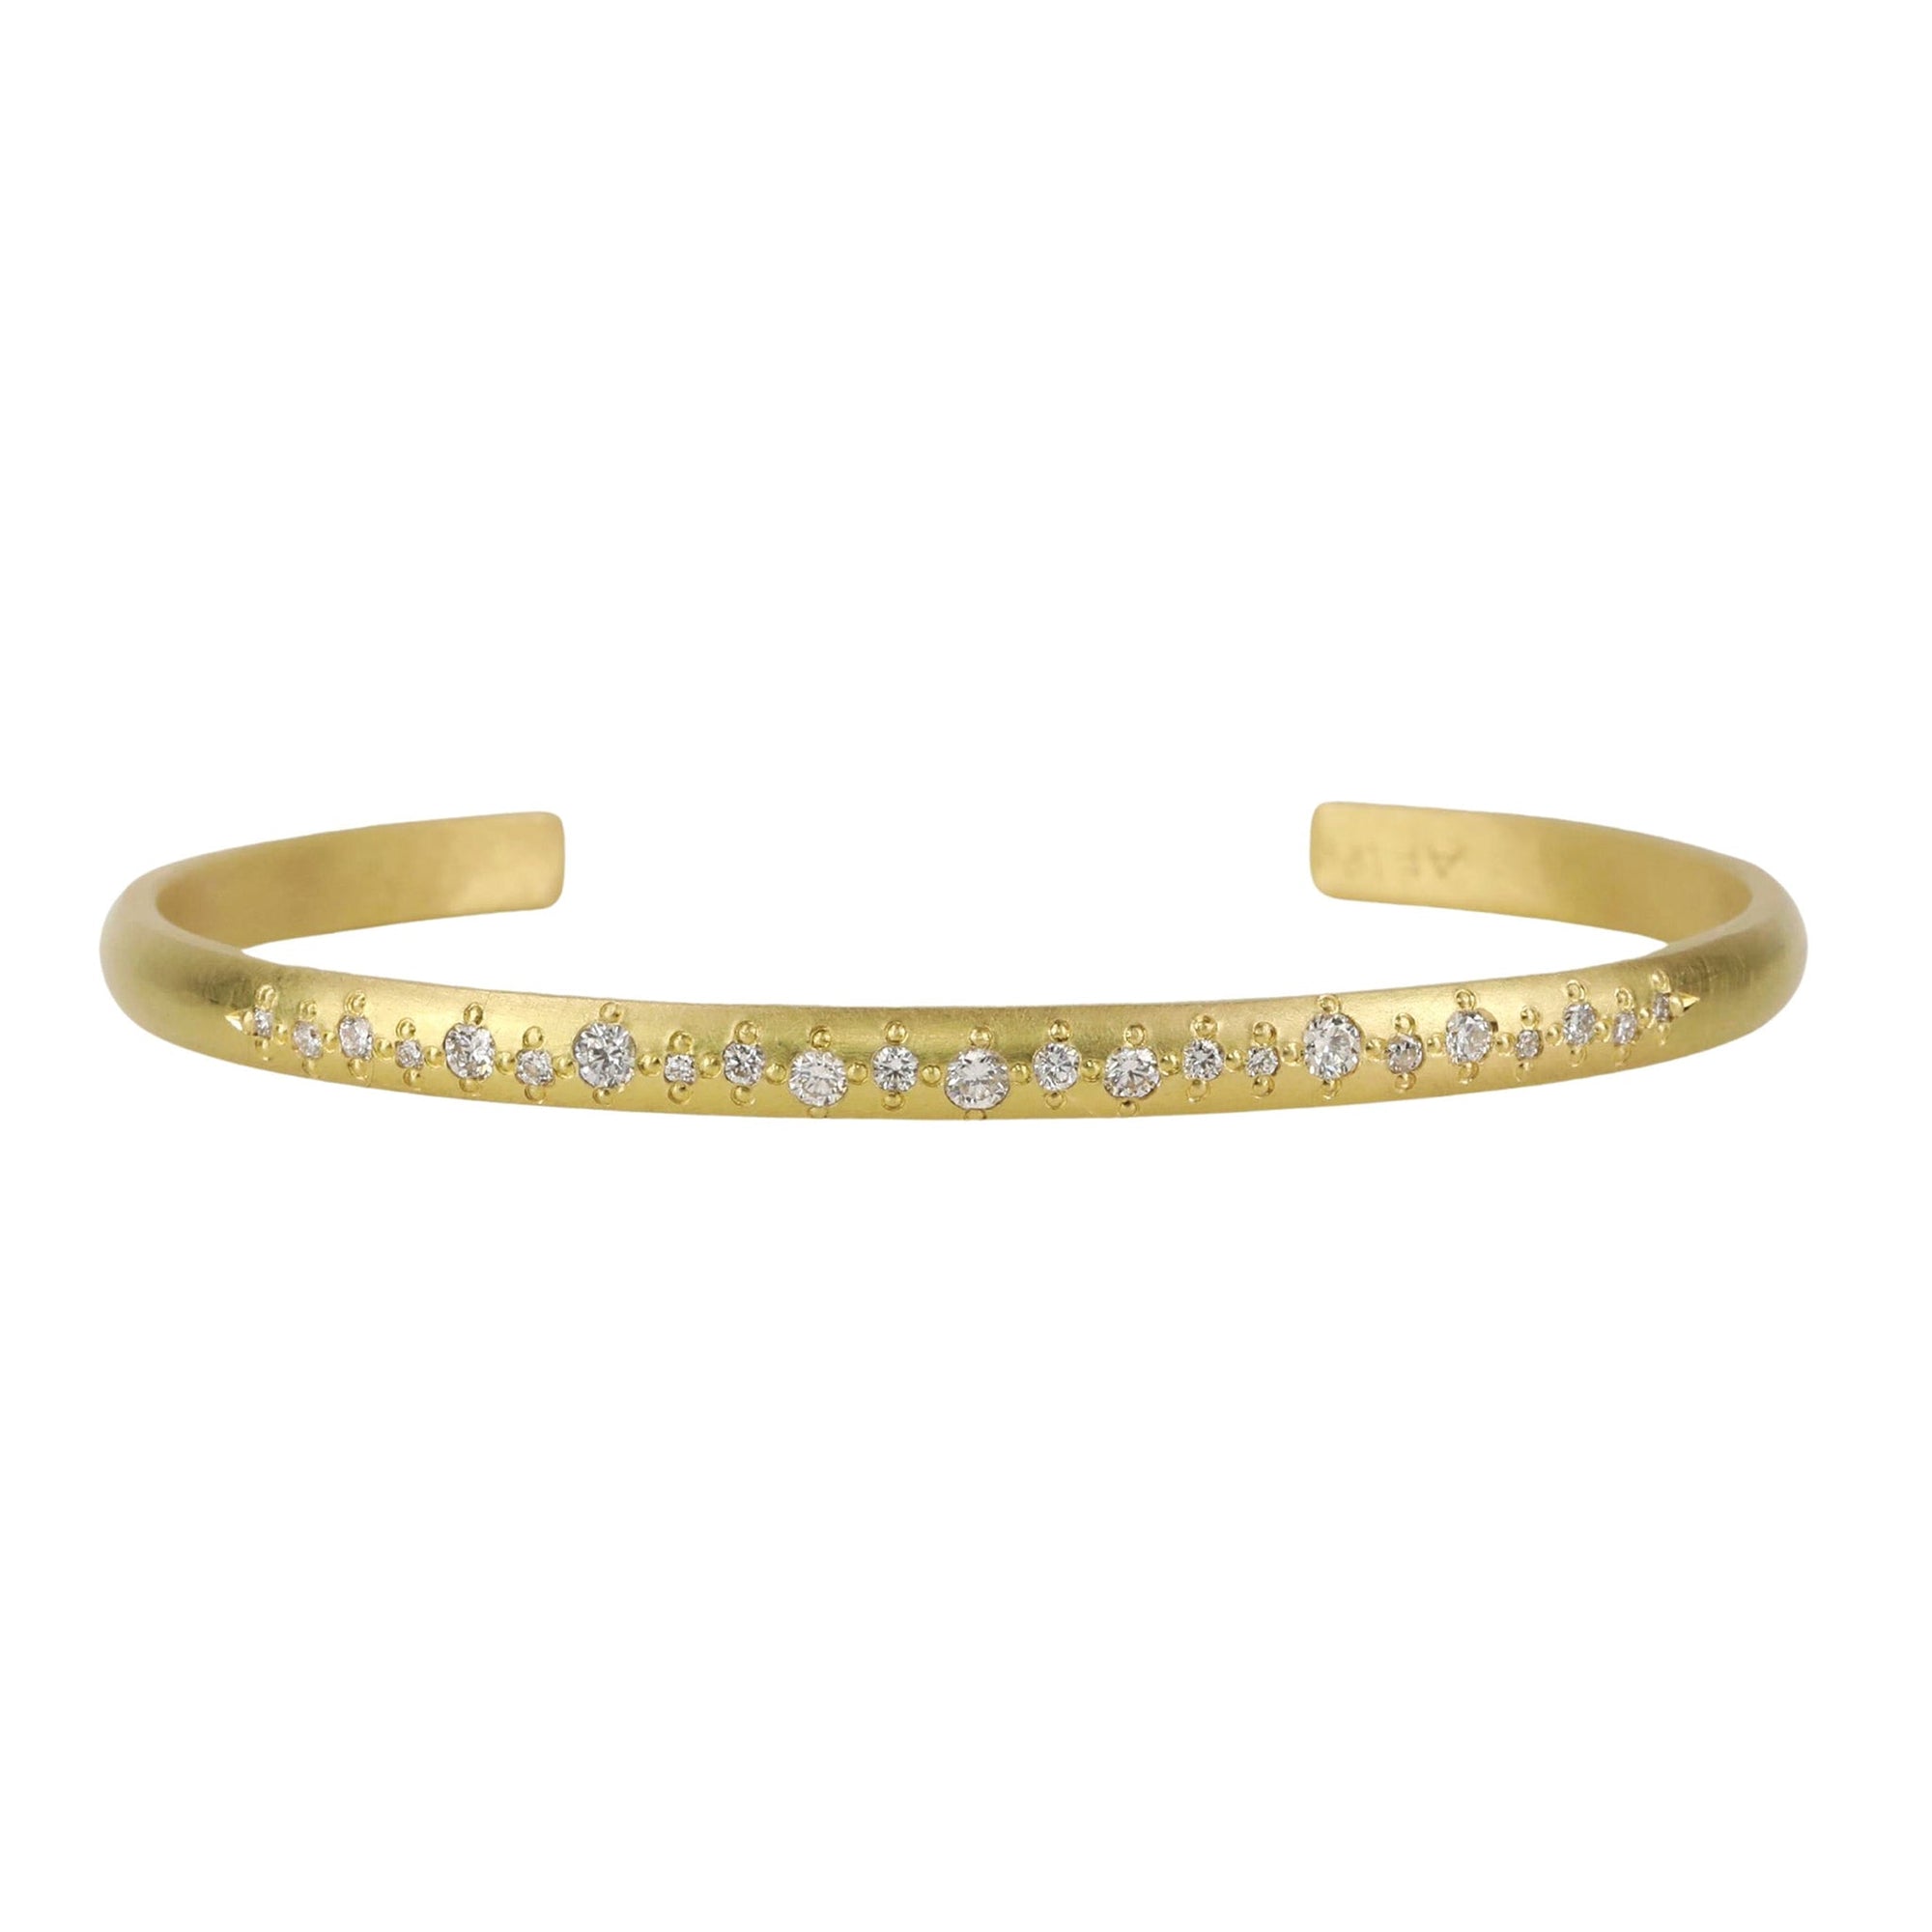 18K Gold Rounded Cuff with Diamonds